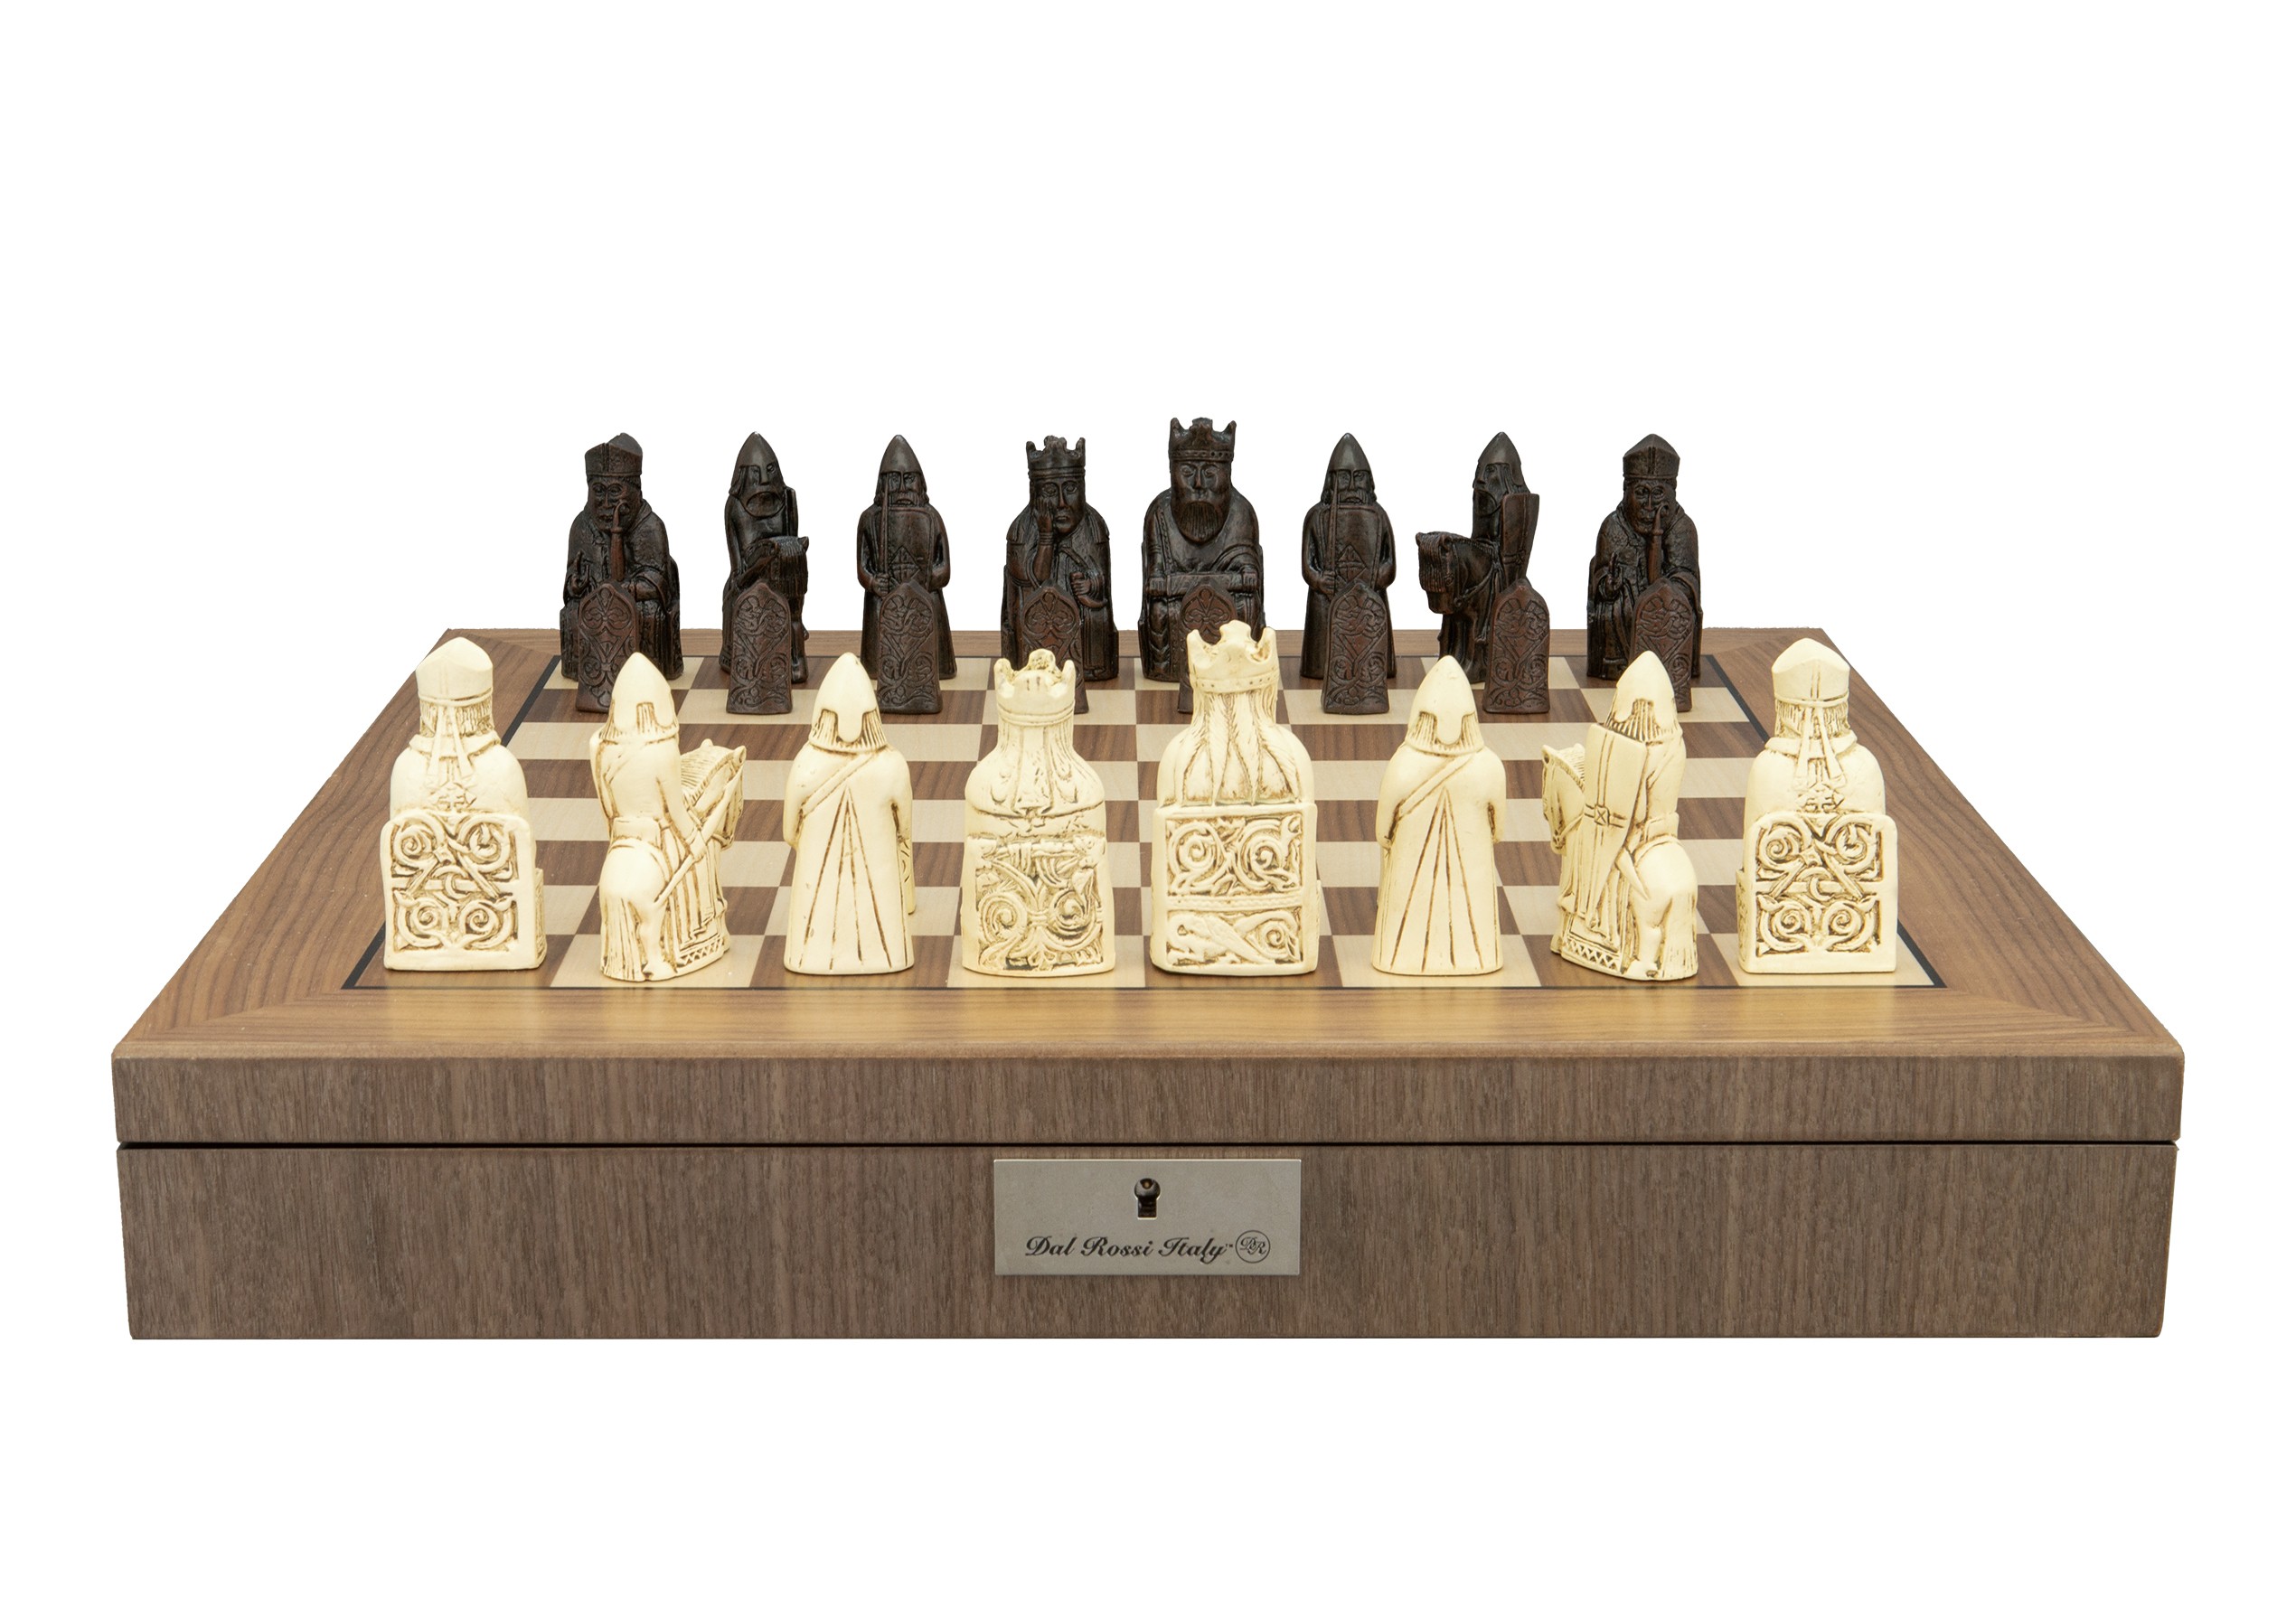 Dal Rossi Italy, Isle of Lewis Chessmen on a Walnut Inlaid Chess Box with Compartments 20"